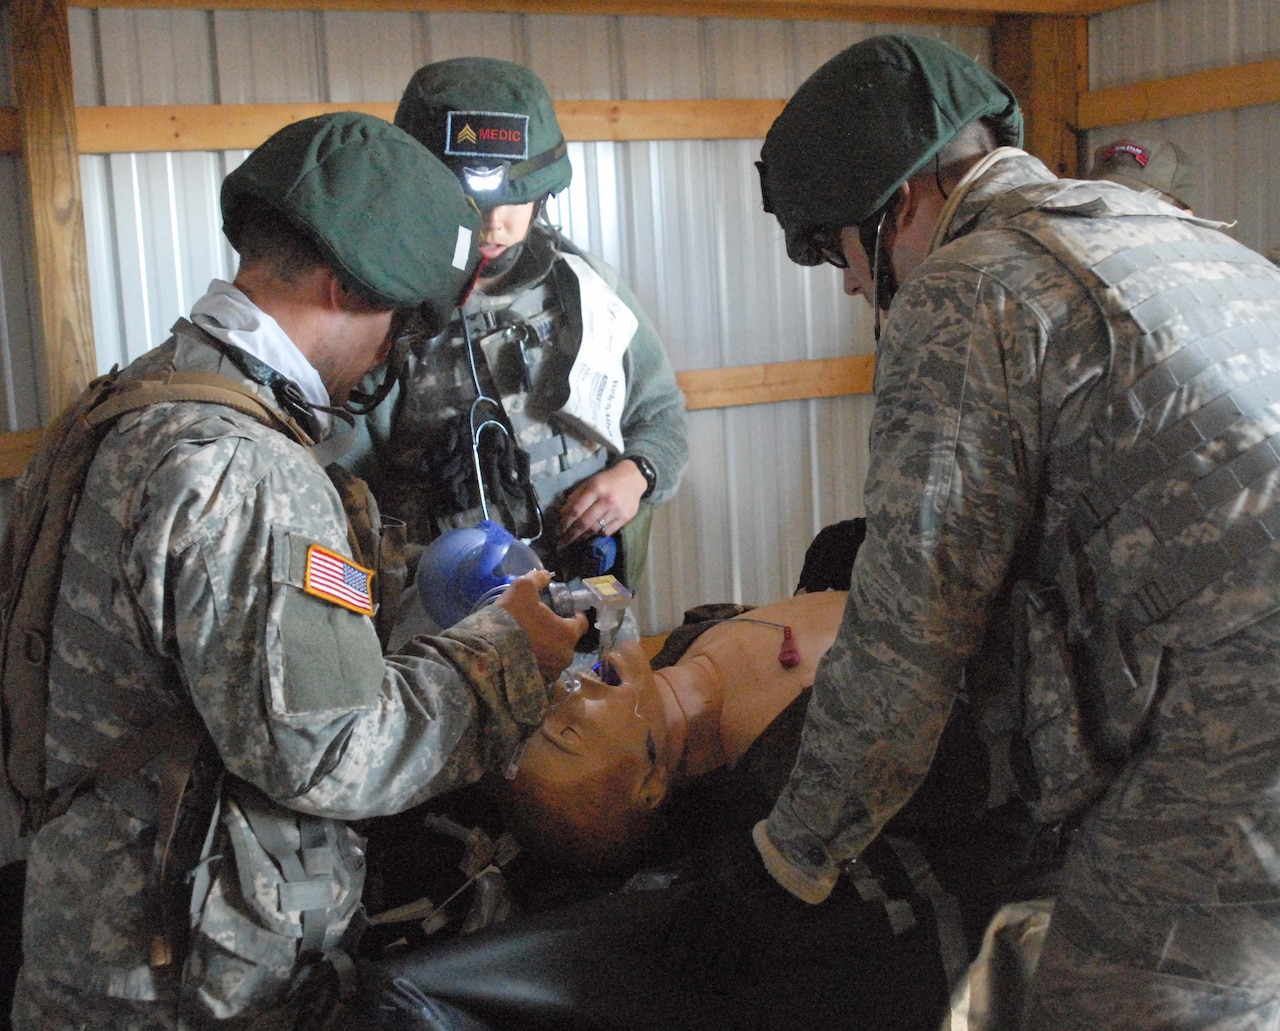 Fourth-year medical students work on a simulated patient presumed to be suffering from diabetic ketoacidosis, when the body has no insulin, as part of Operation Bushmaster, a field training exercise conducted at Fort Indiantown Gap, Pa. DoD photo by Sarah Marshall